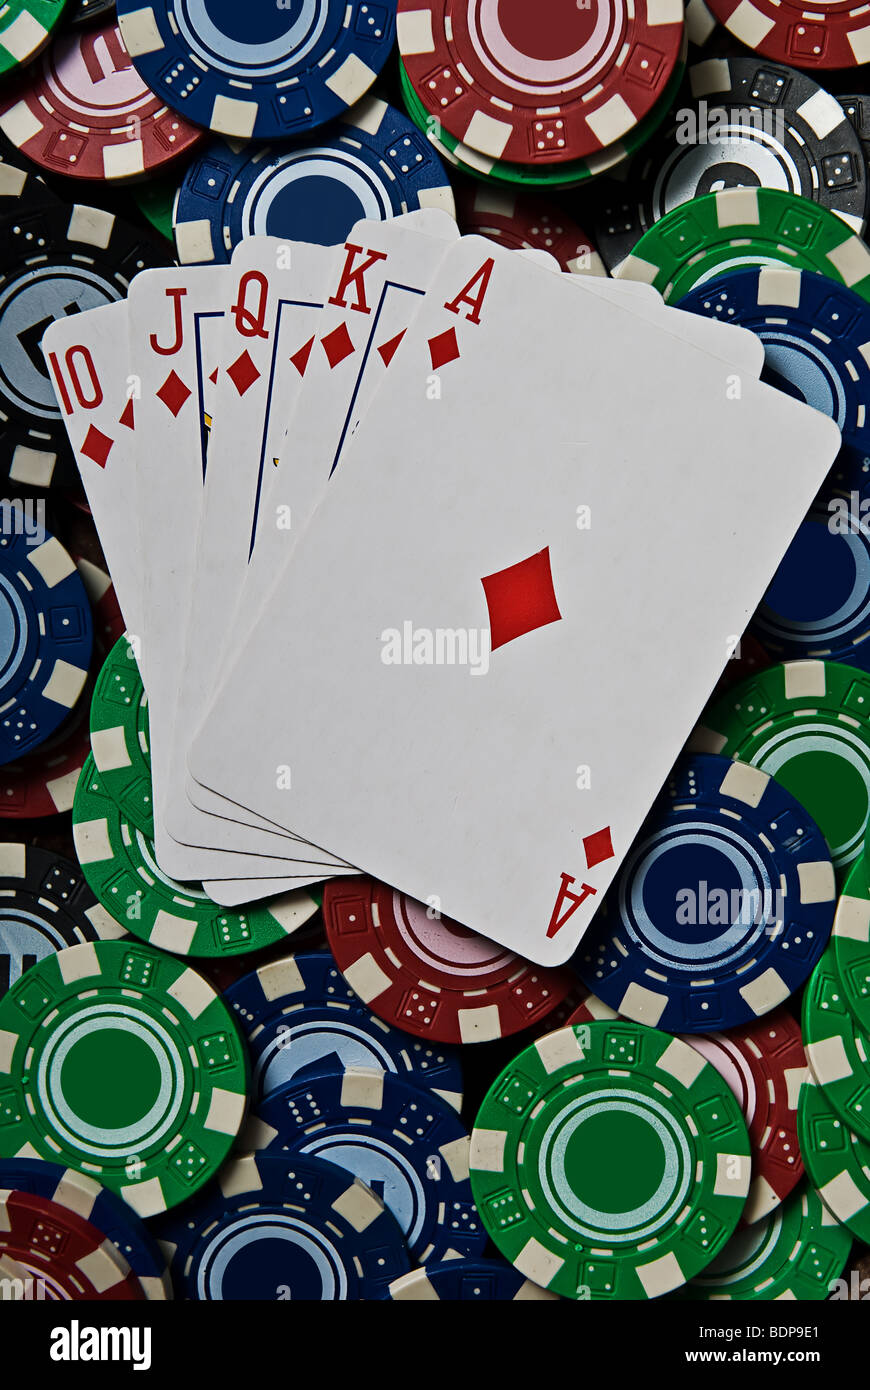 Three Playing Cards: King, Queen and Jack of Diamonds. Stock Image - Image  of game, diamonds: 141008989